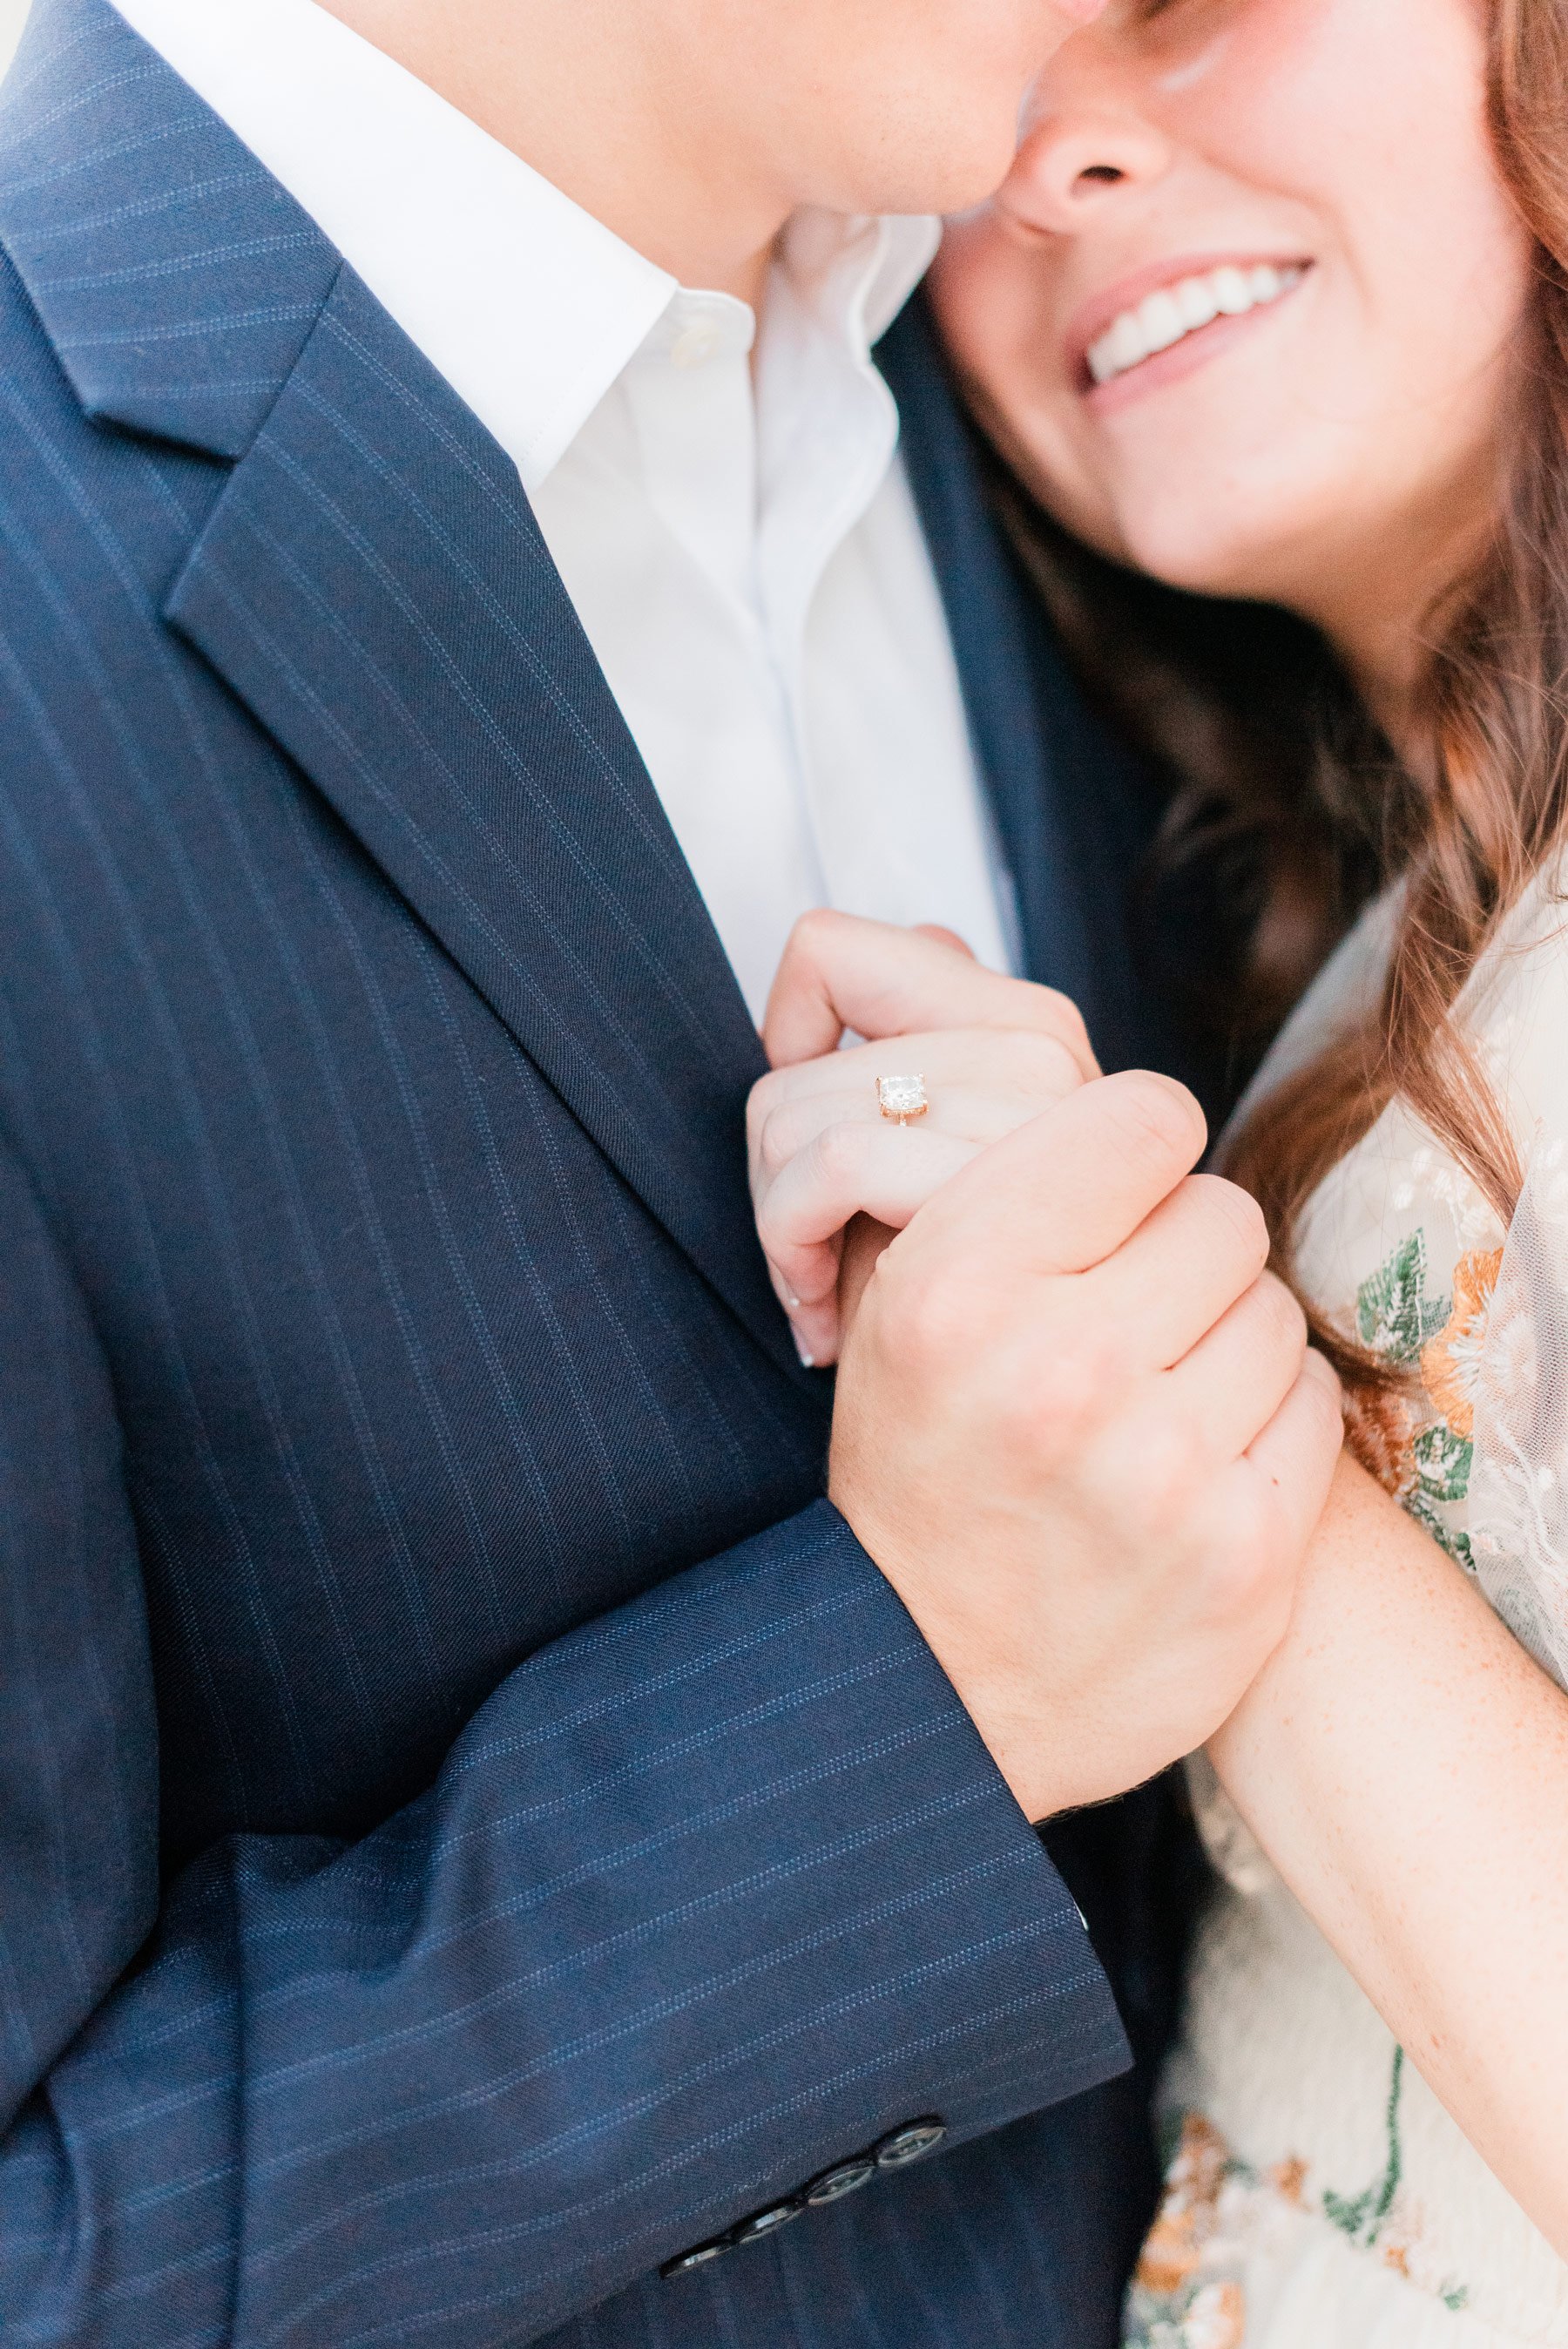    I love capturing details such as the engagement ring and outfit details. #trilithstudios #georgiaweddingphotographer #fayettevillephotographer #fayettevilleengagementphotos #outdoorengagements #formalengagementphotos #reasonstobookengagementphotos